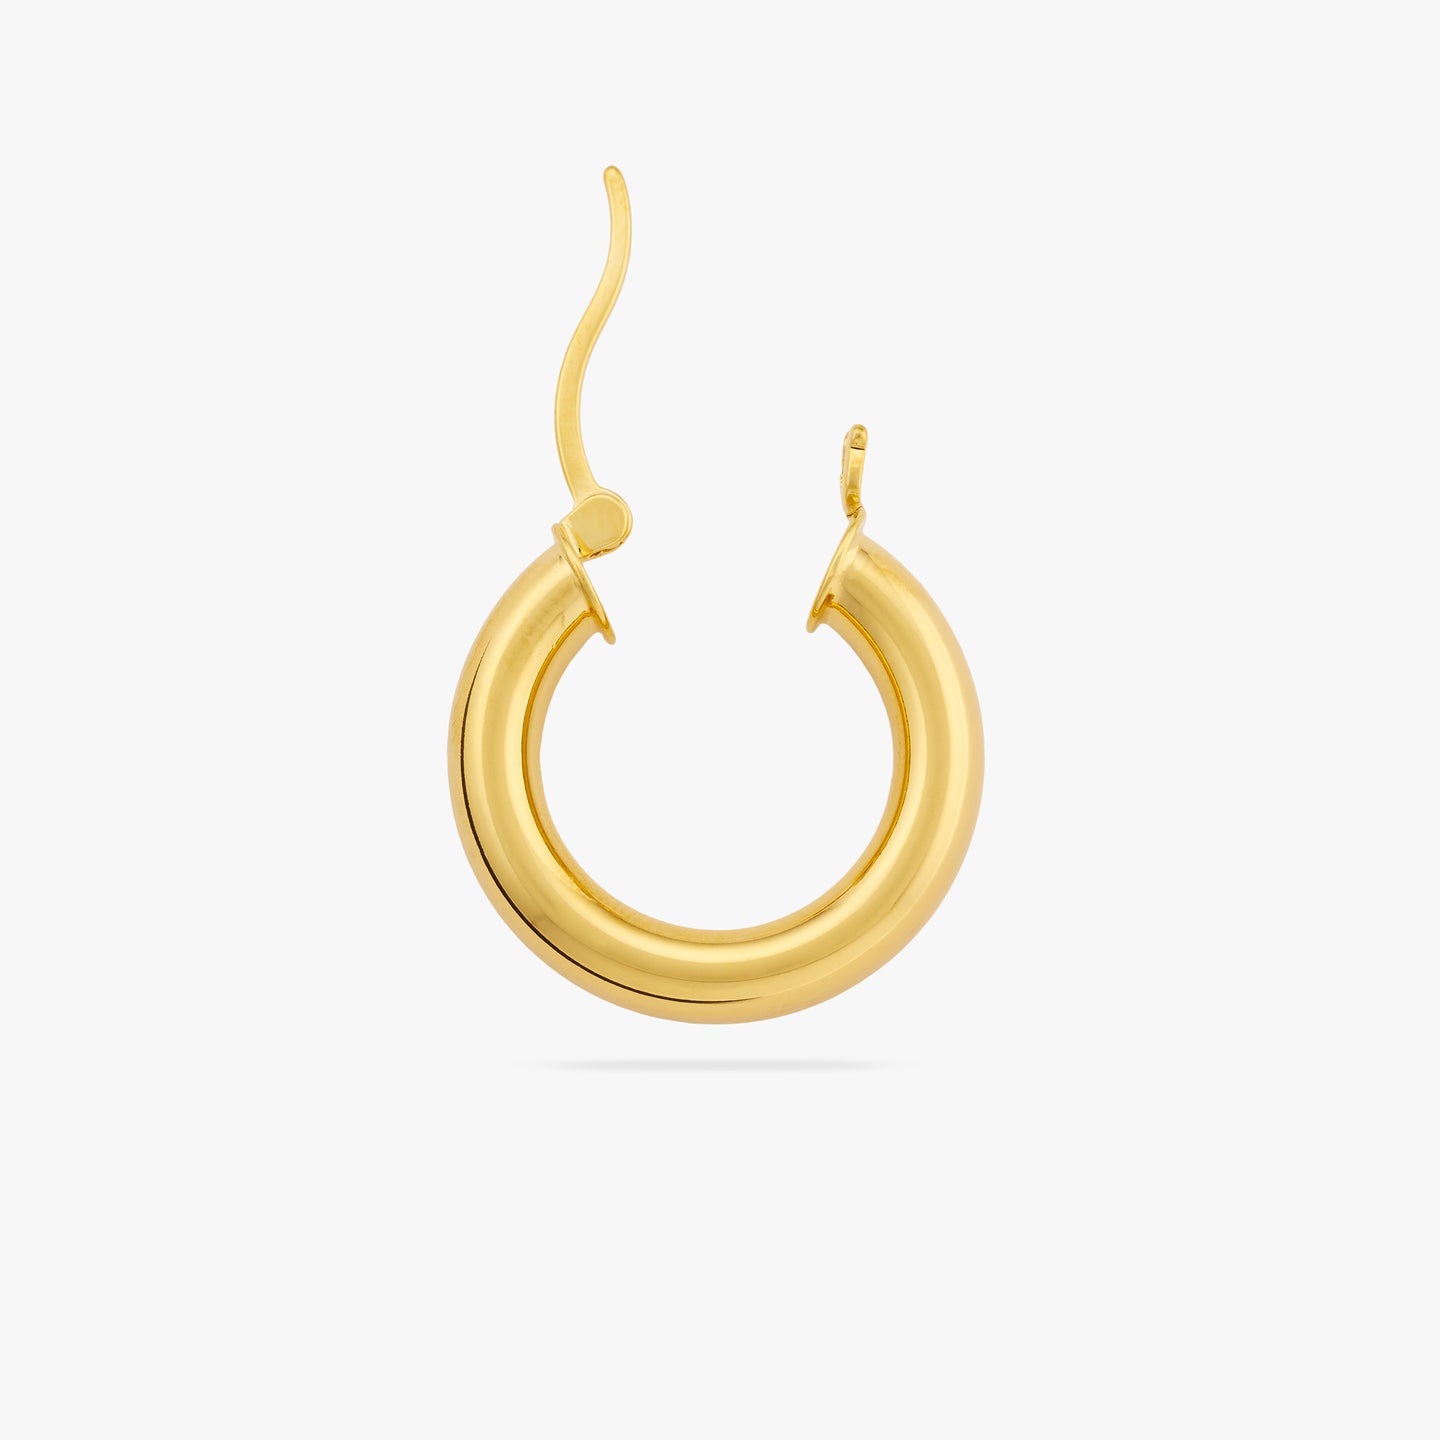 This is a chunky gold tube hoop with its clasp undone color:null|gold